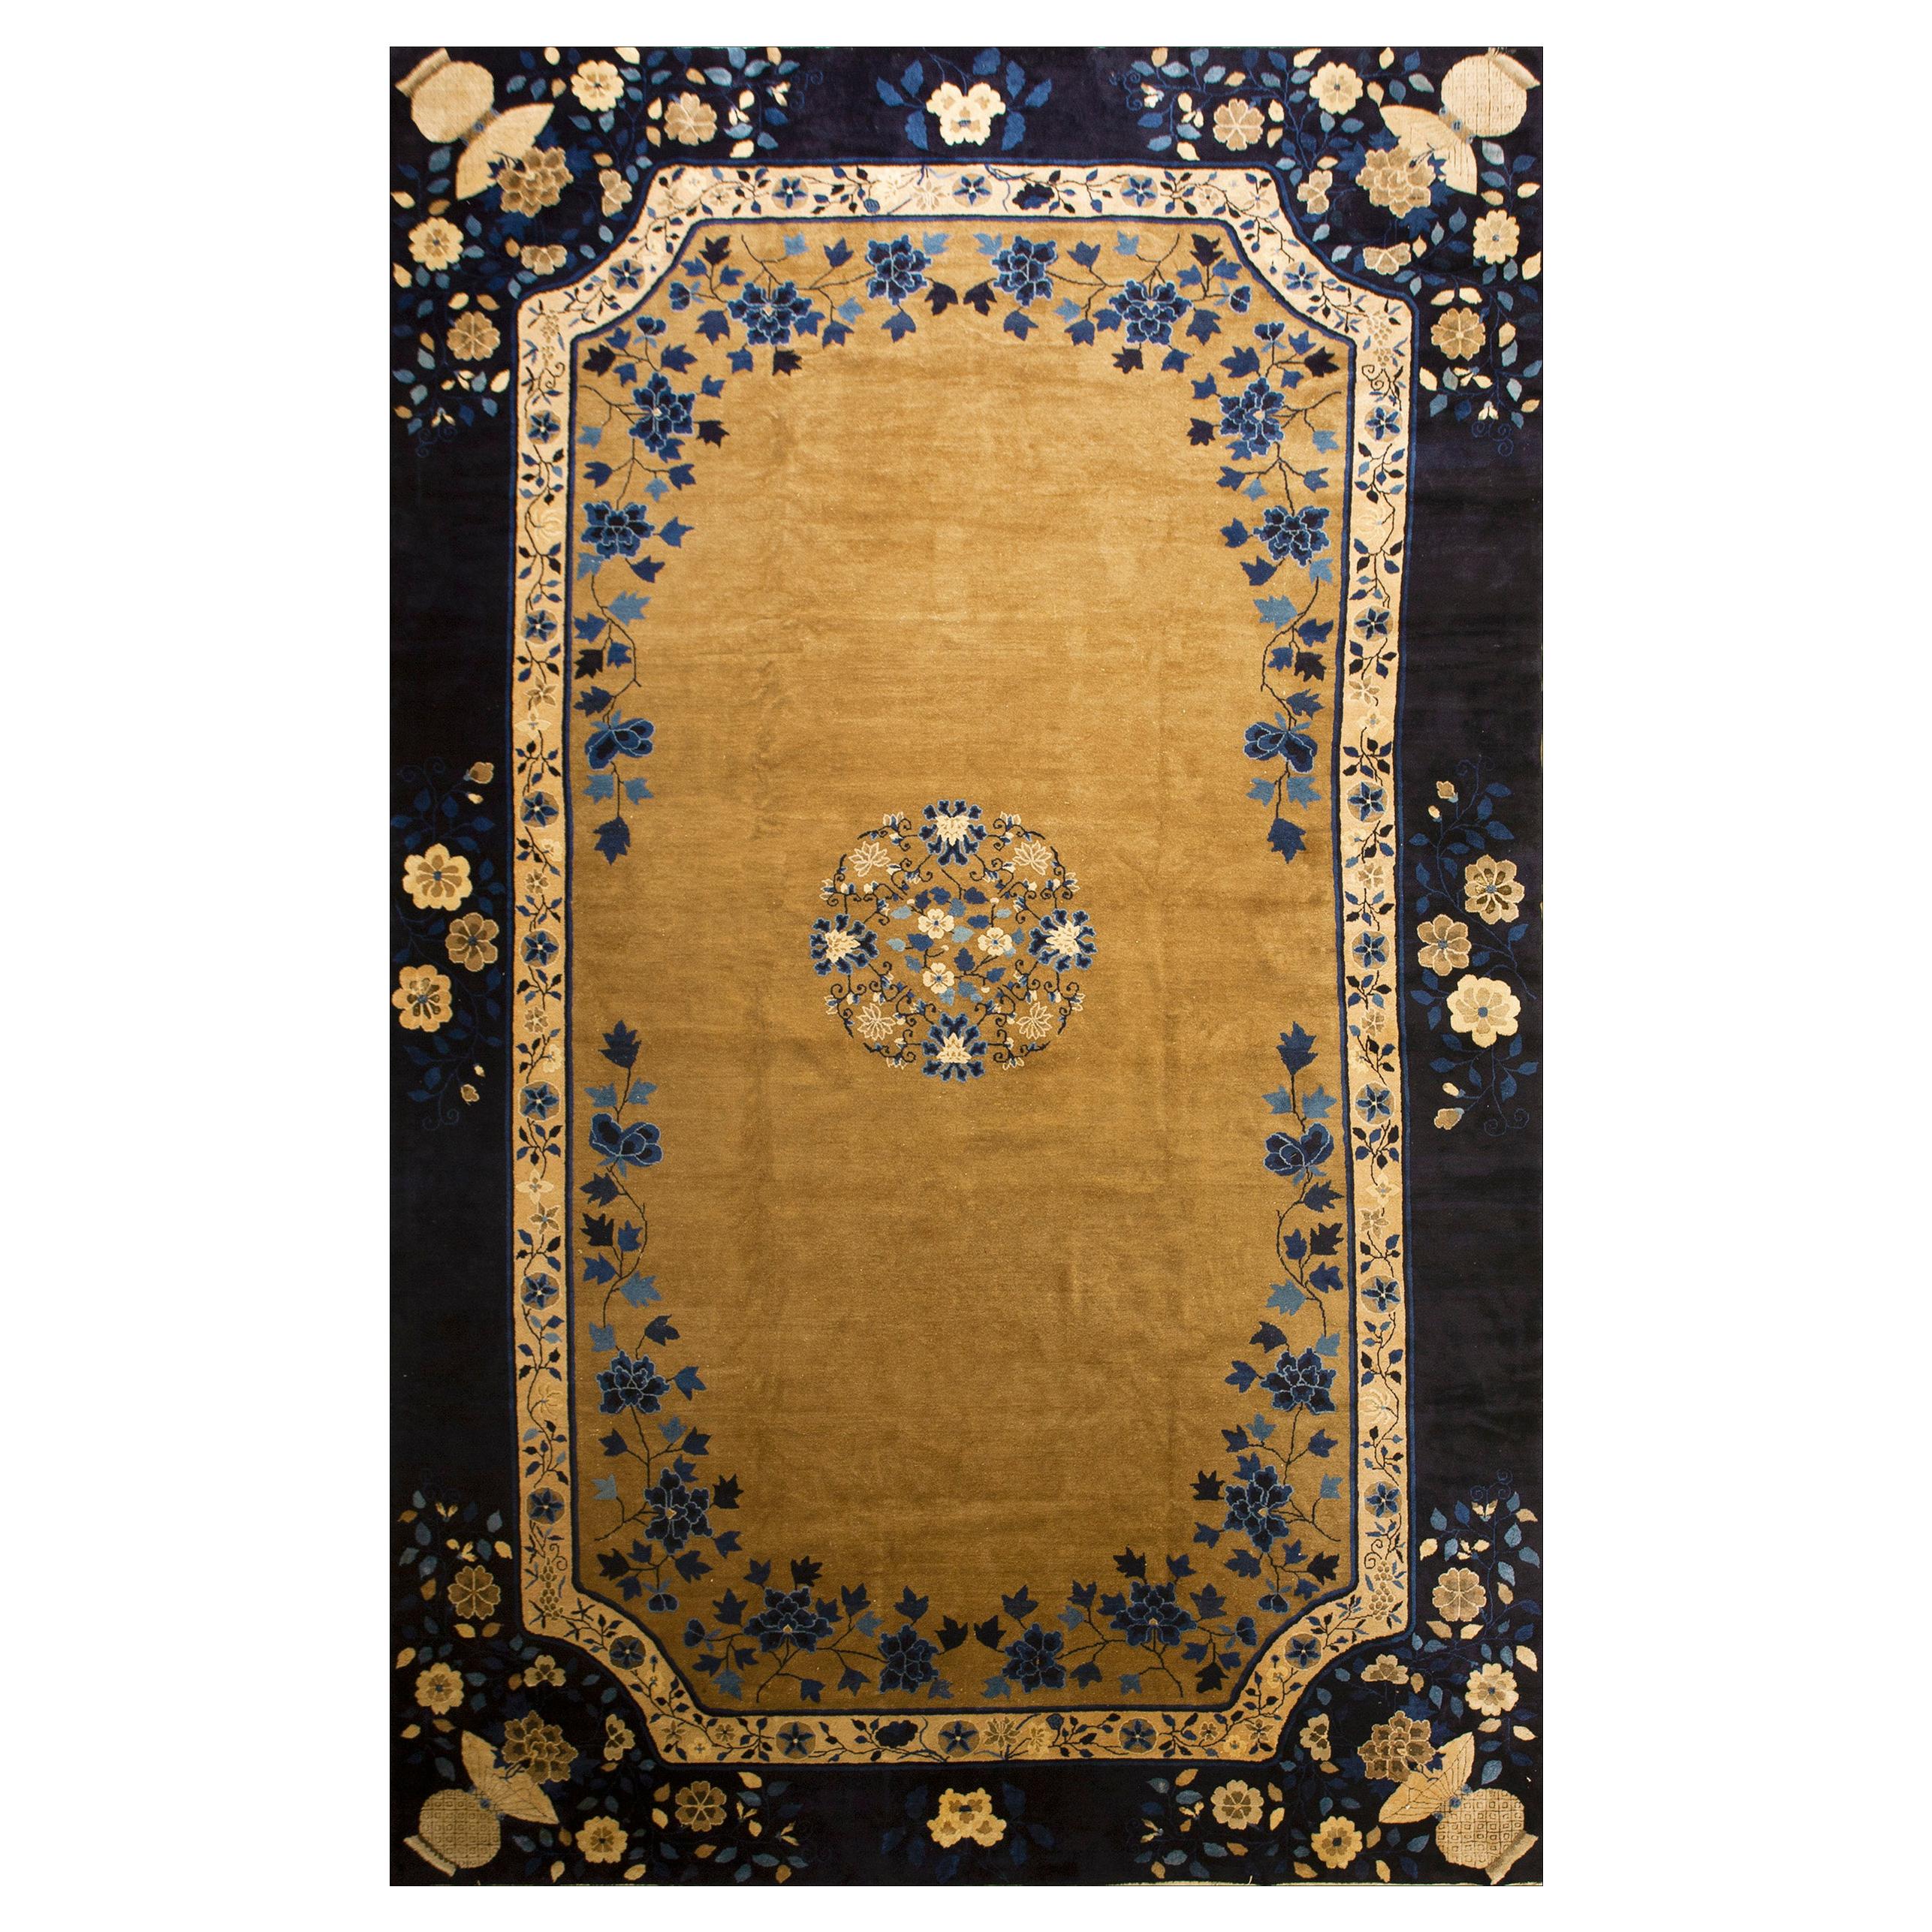 1920s Chinese Peking Carpet ( 10'10" x 17'2" - 330 x 523 ) For Sale